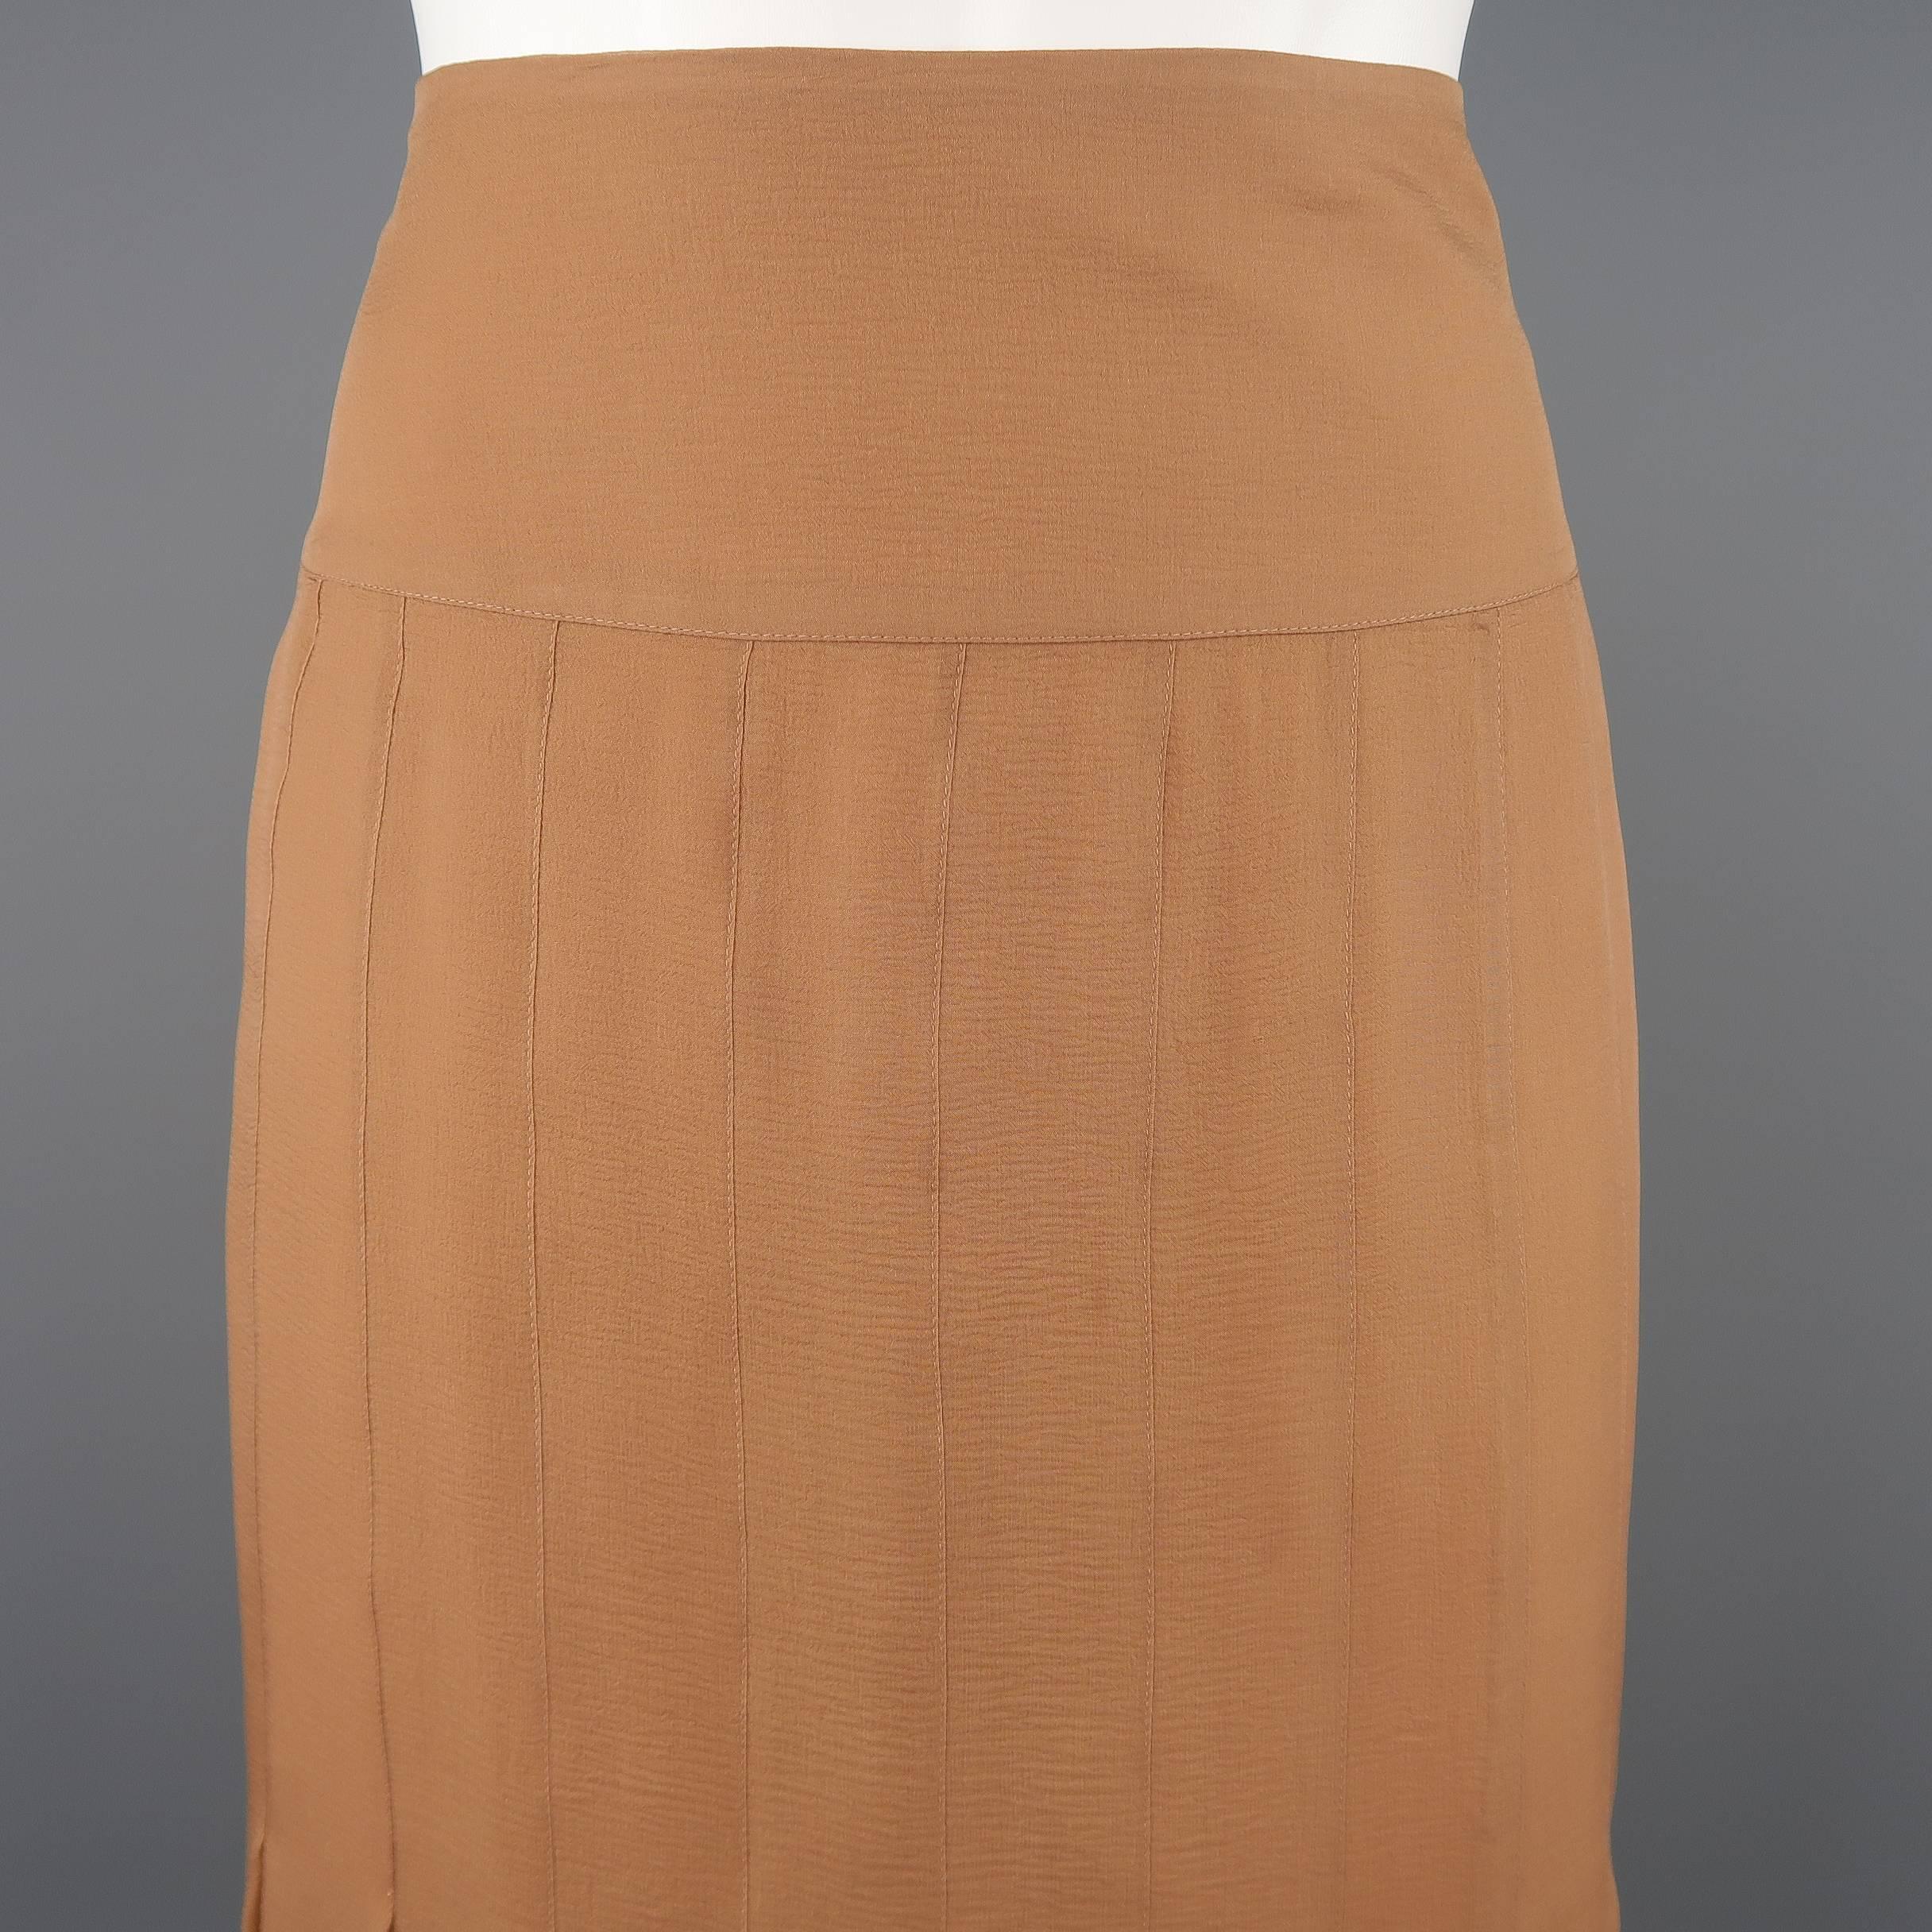 CHANEL pencil skirt comes in tan beige silk crepe chiffon with a box pleated construction, pleated hem, and thick waistband. Made in France.
 
Excellent Pre-Owned Condition.
Marked: FR 40  03A
 
Measurements:
 
Waist: 30 in.
Hip: 40 in.
Length: 22.5